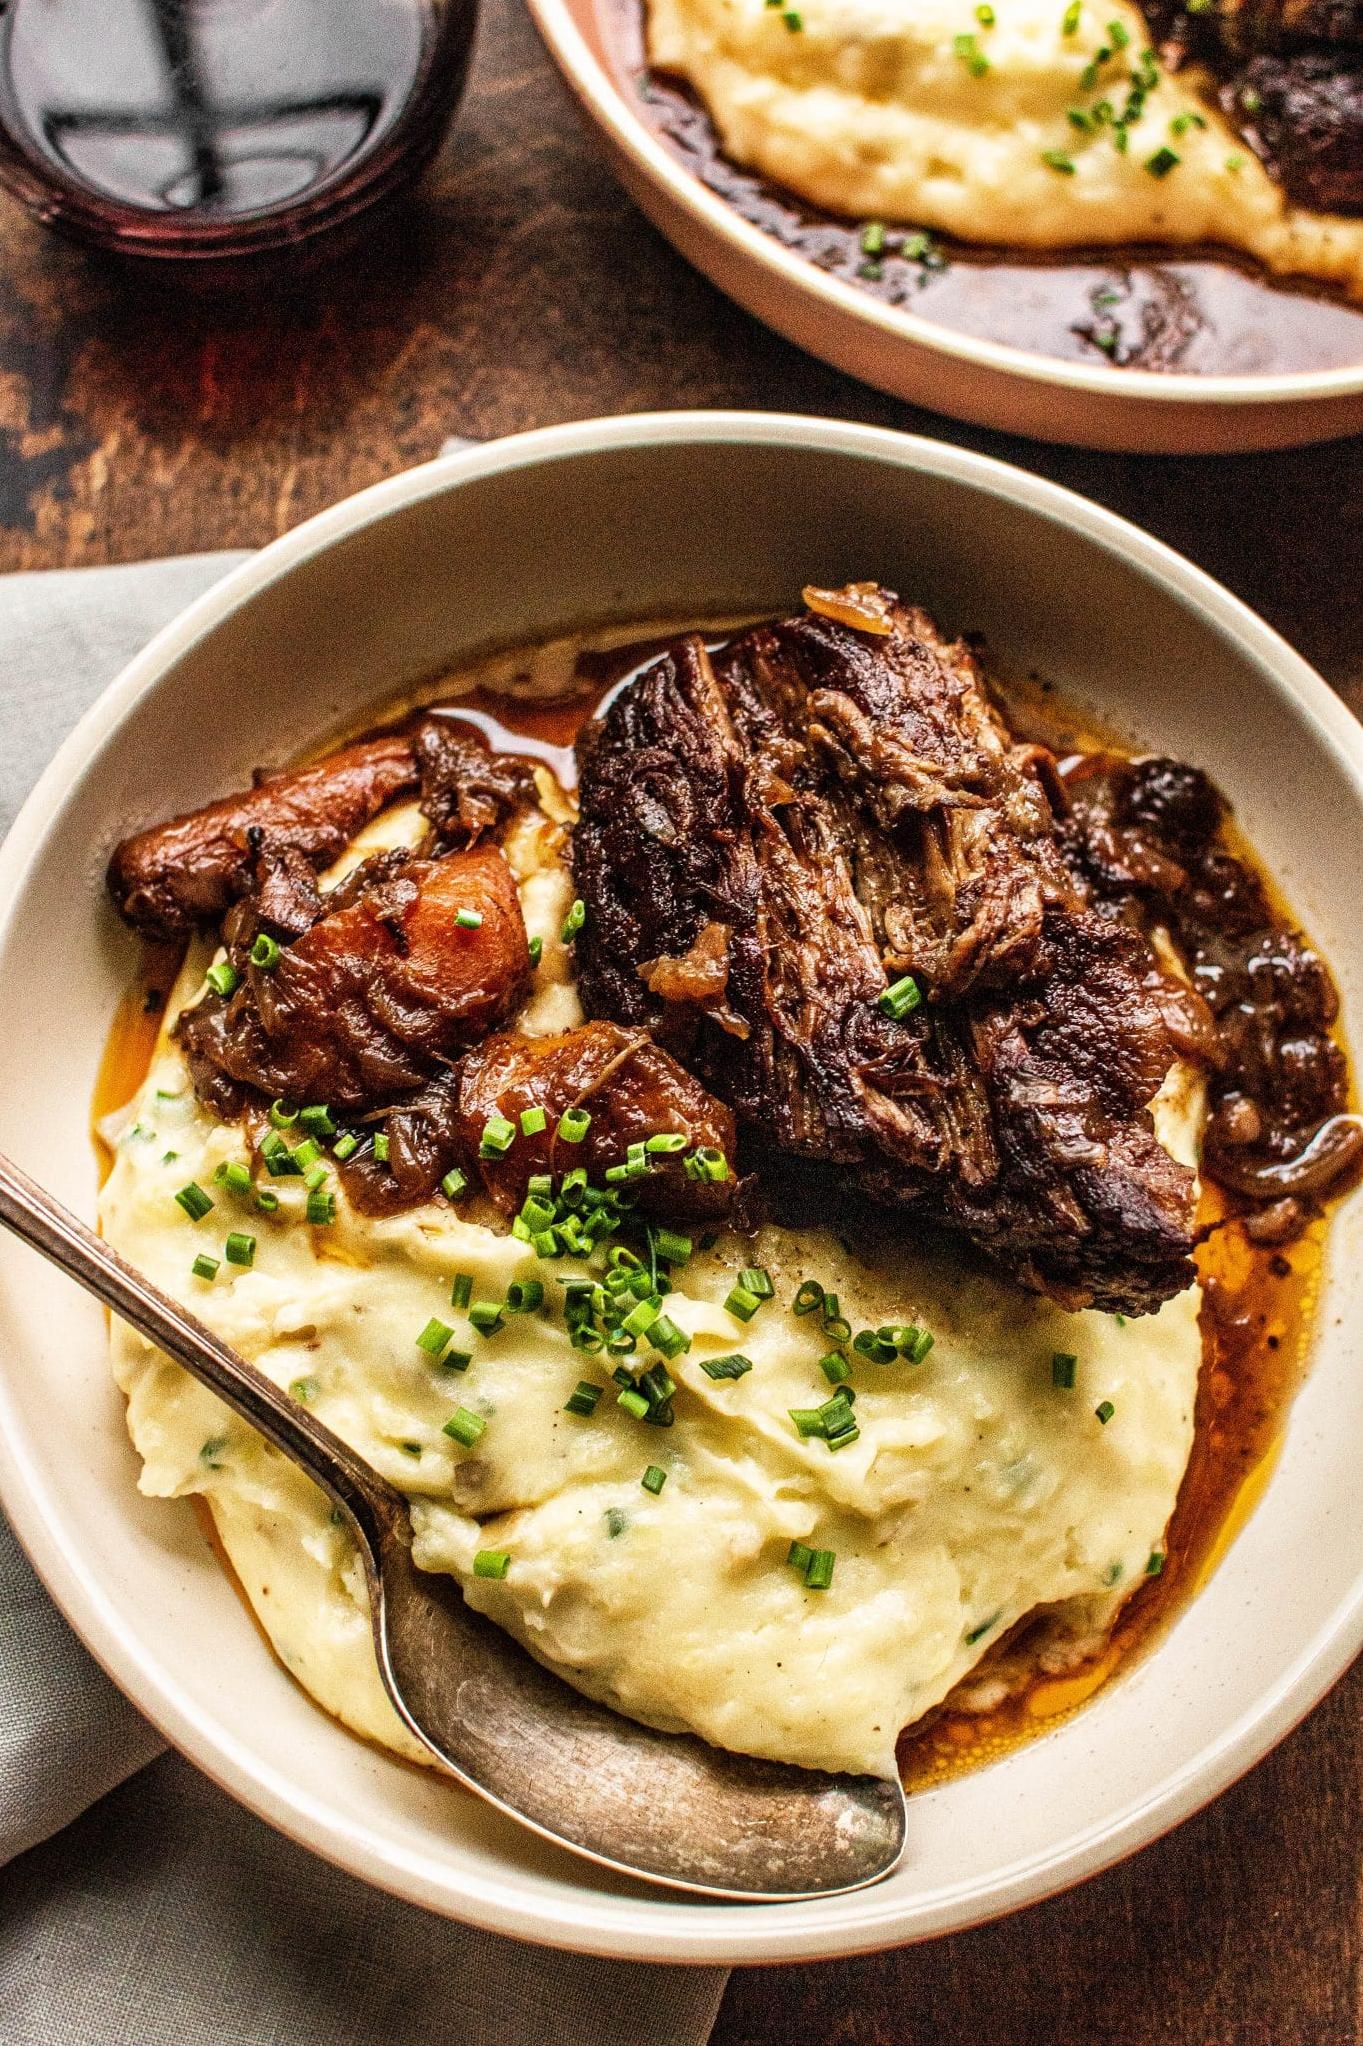  This beef dish braised in red wine is comfort food in a pot.